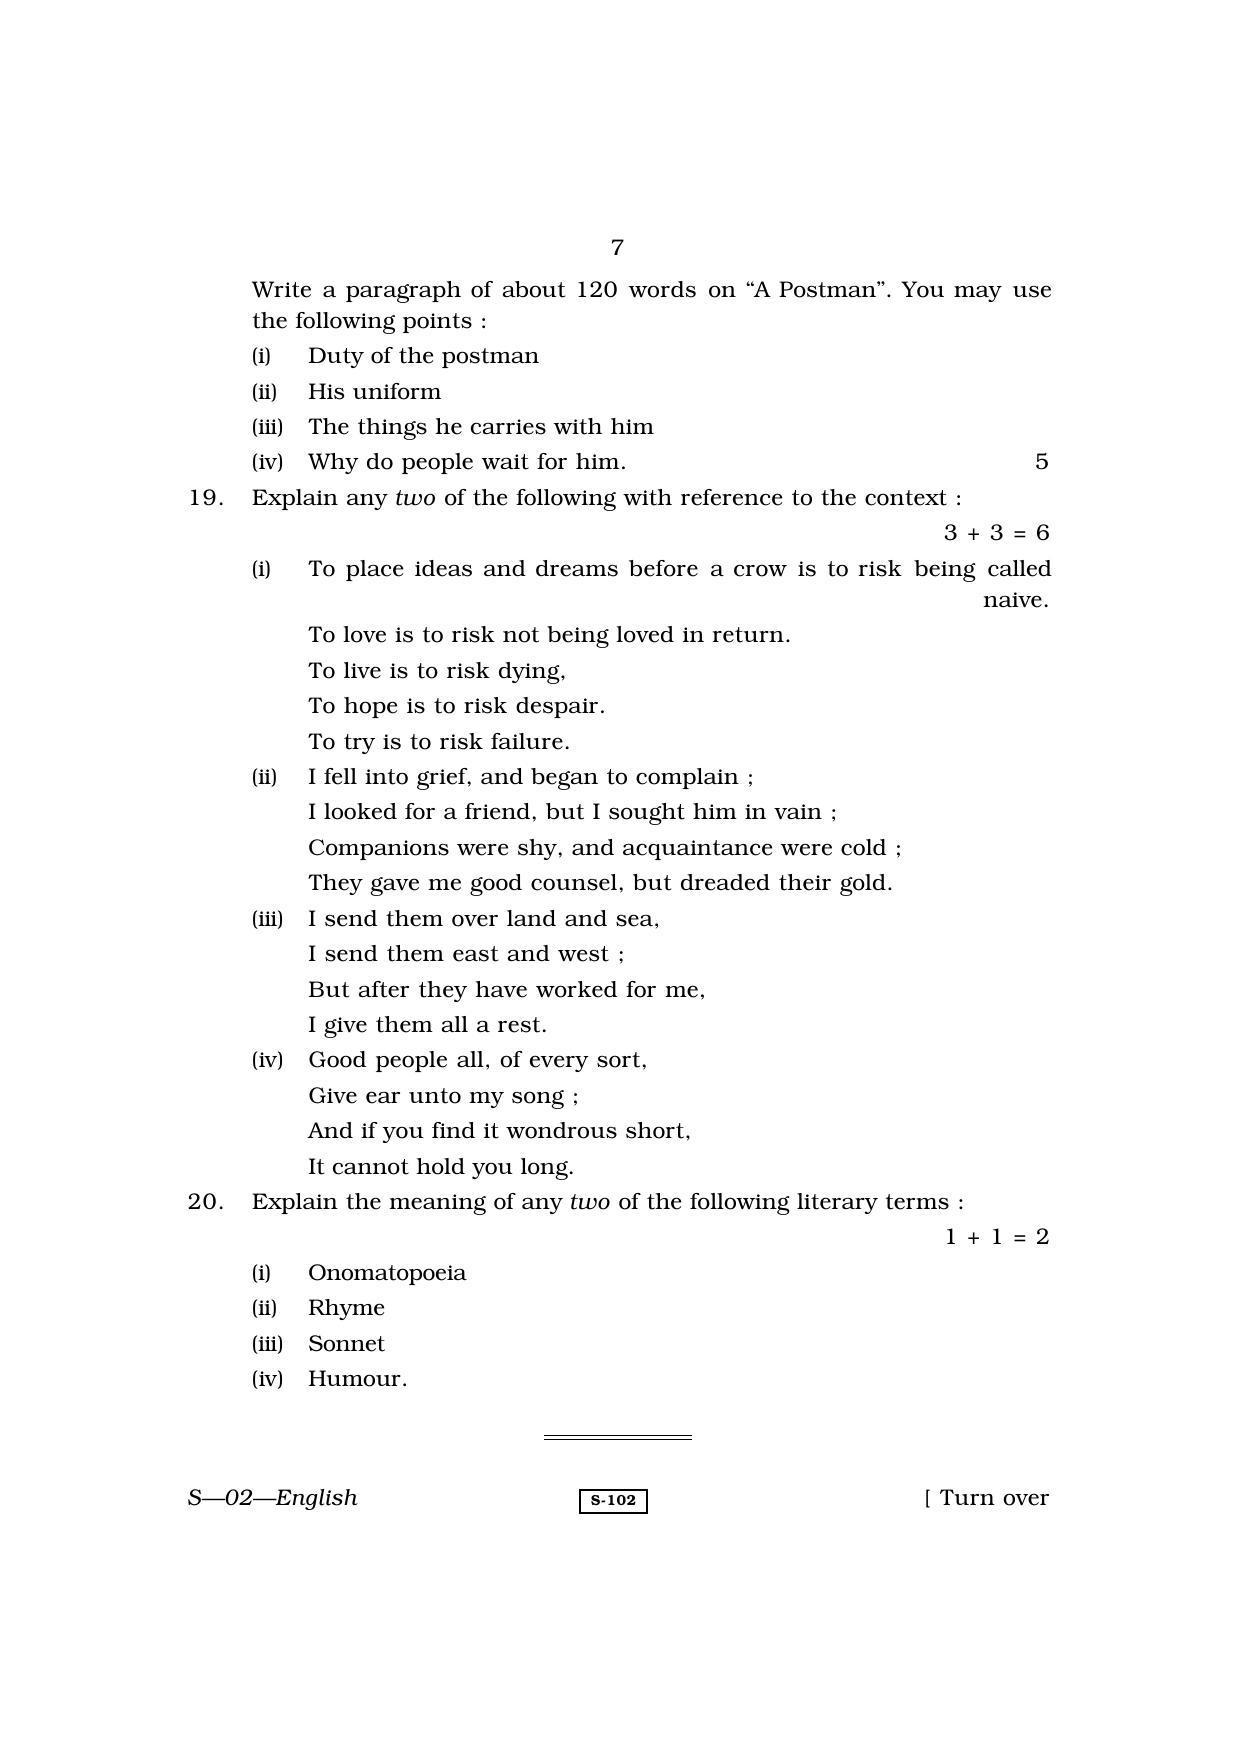 RBSE Class 10 English 2010 Question Paper - Page 7